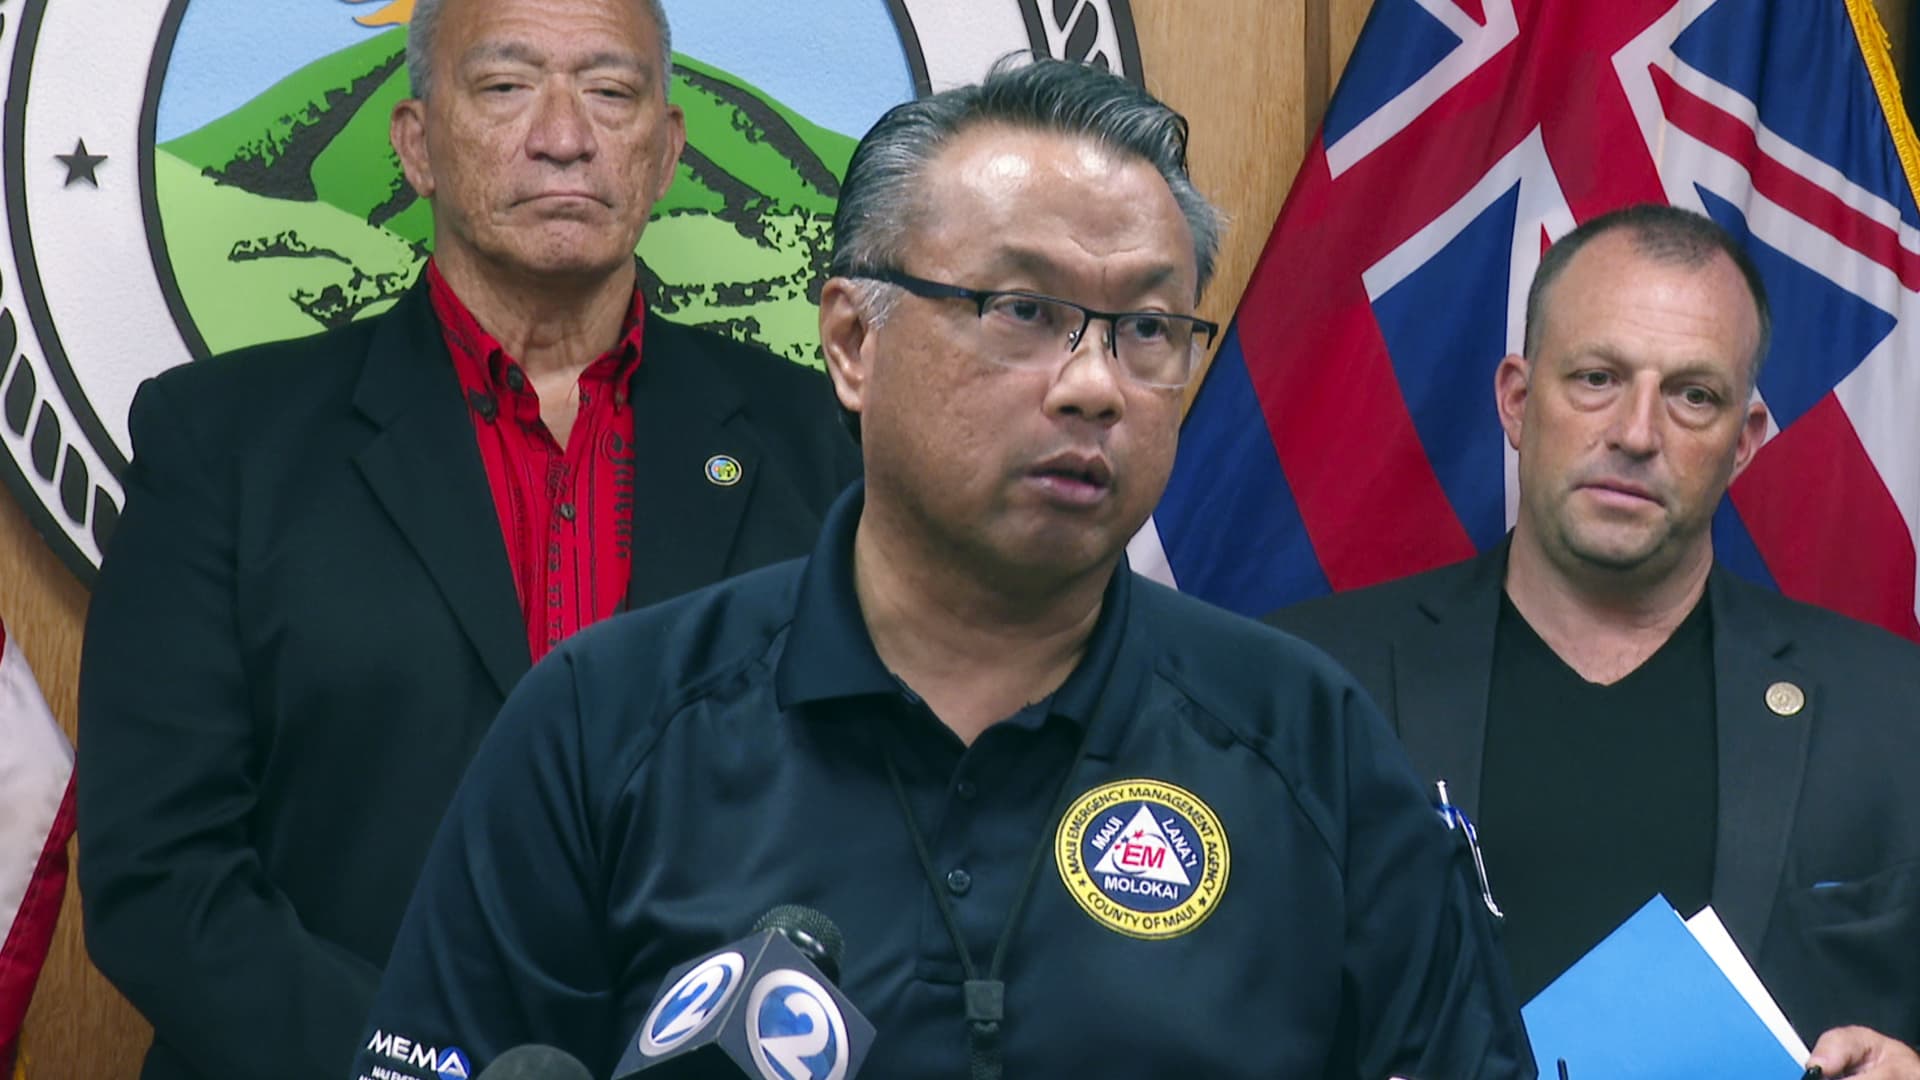 Maui emergency chief resigns after defending decision to not activate